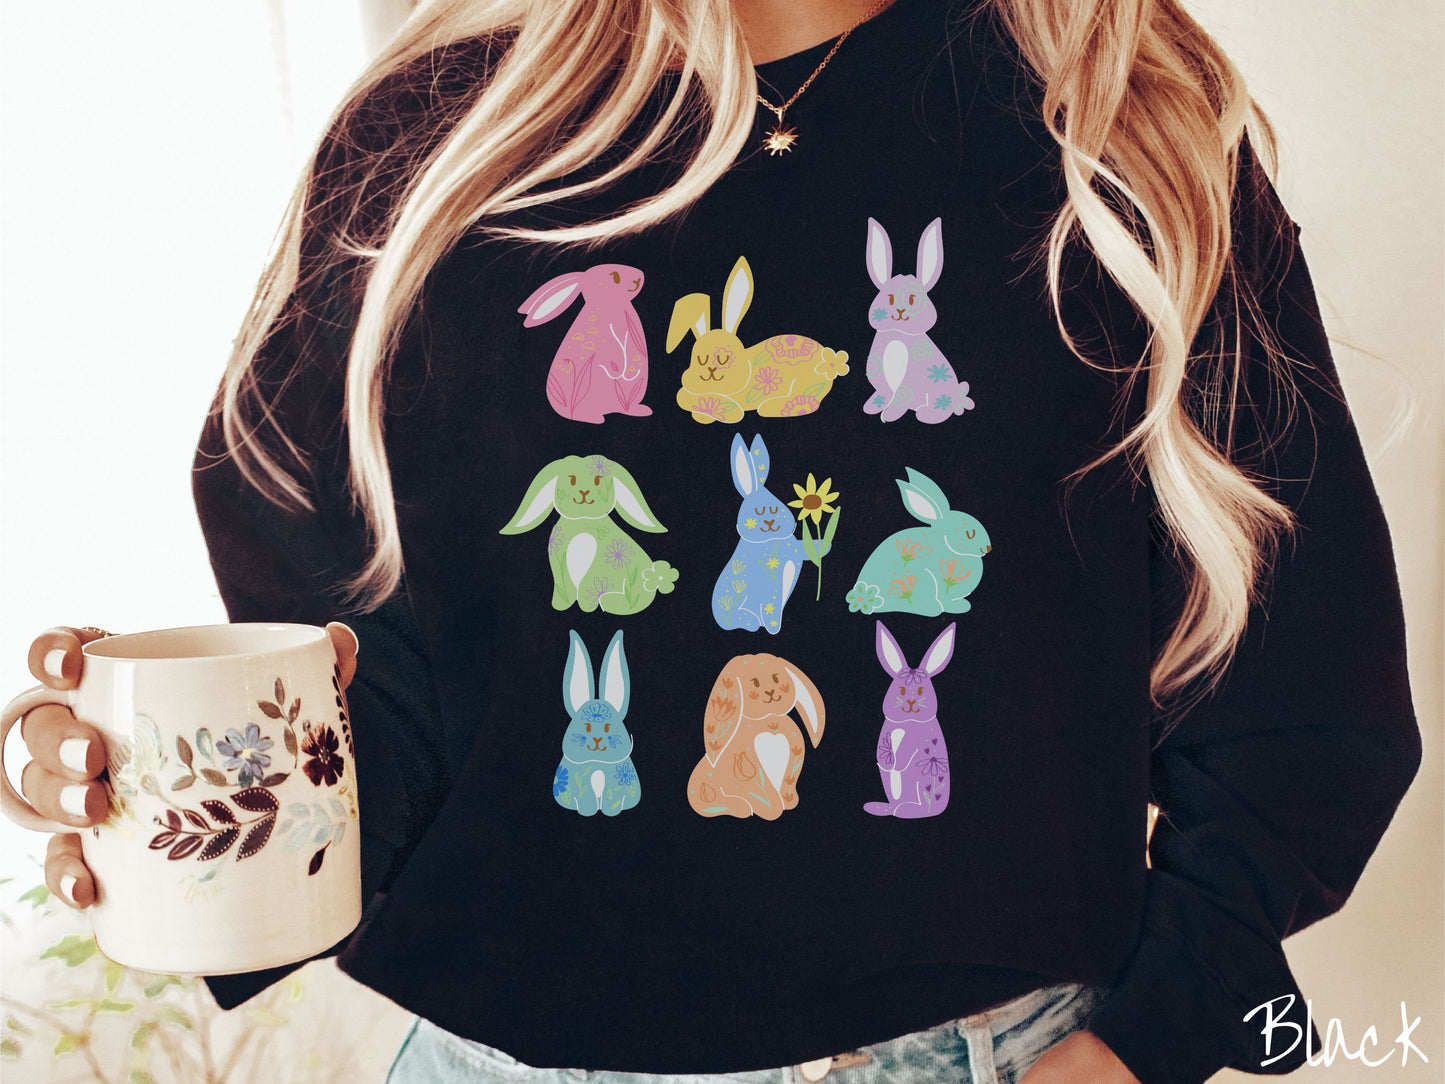 A woman wearing a cute, vintage black colored sweatshirt with a three by three grid of colorful bunny rabbits. They are from left to right pink, yellow, purple, green, blue, seafoam, light blue, orange, and purple with flowers near them.